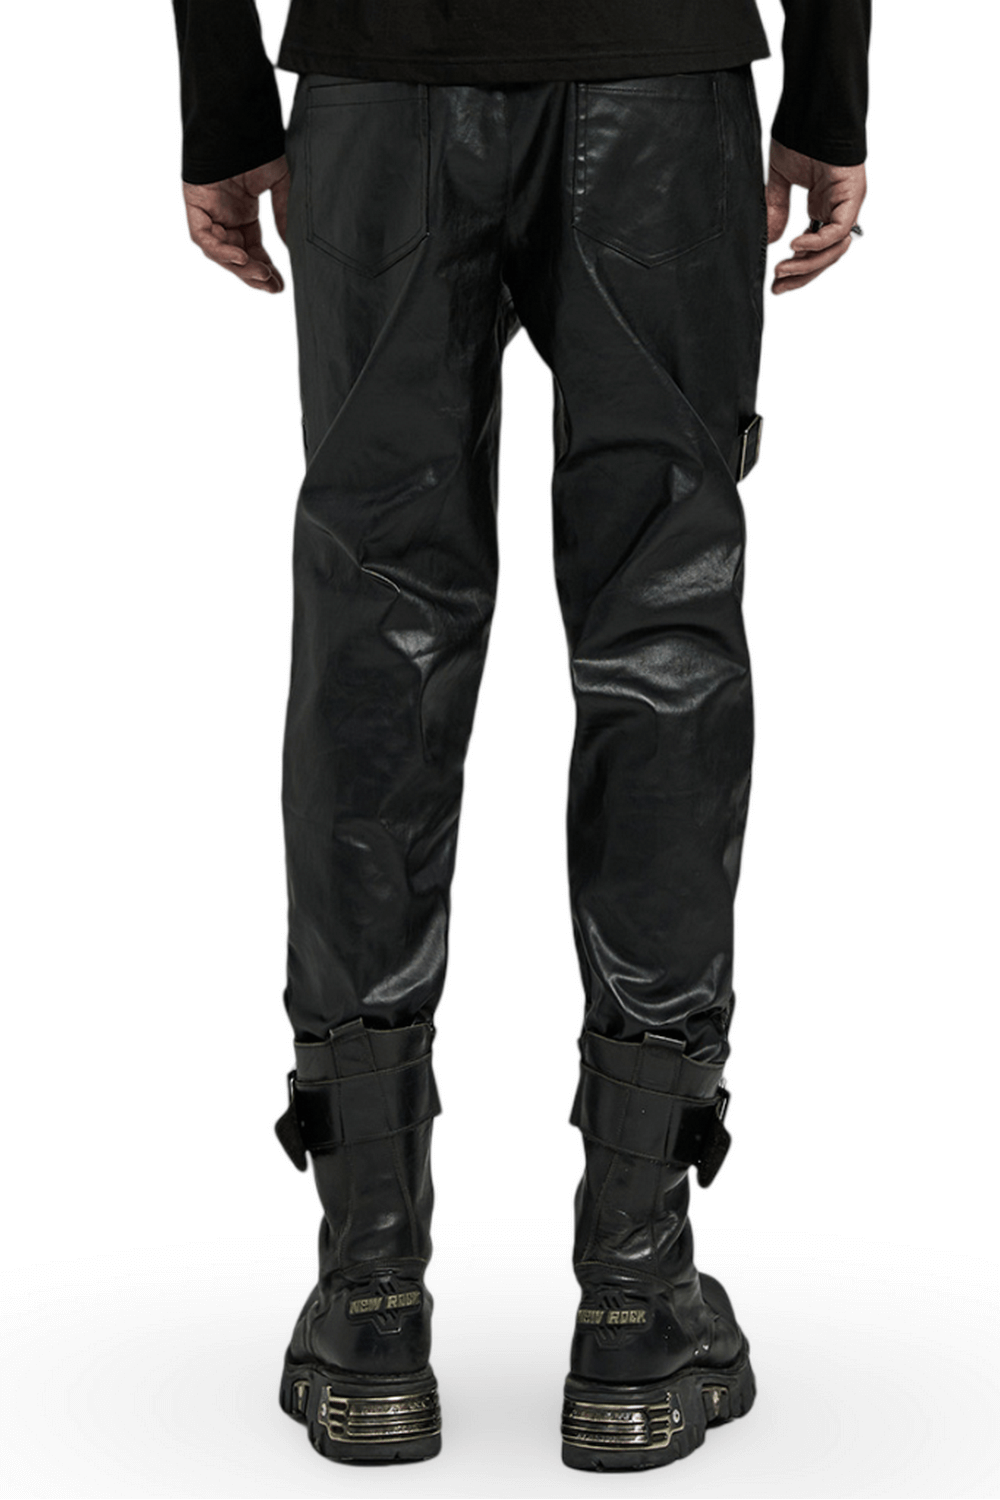 Elastic Men's Punk Style Leather Pants with Zippers